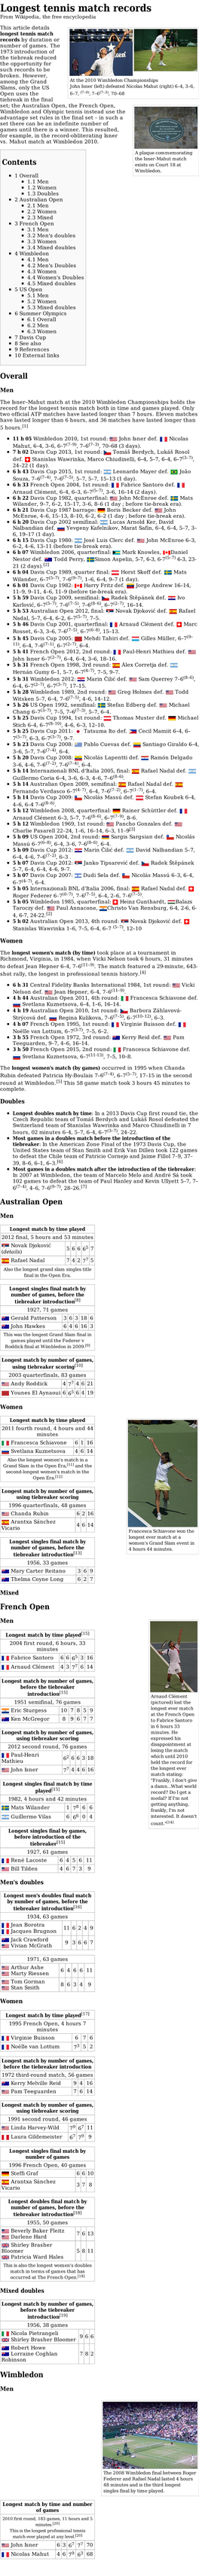 Davis Cup 8 See Also 9 References 10 External Links